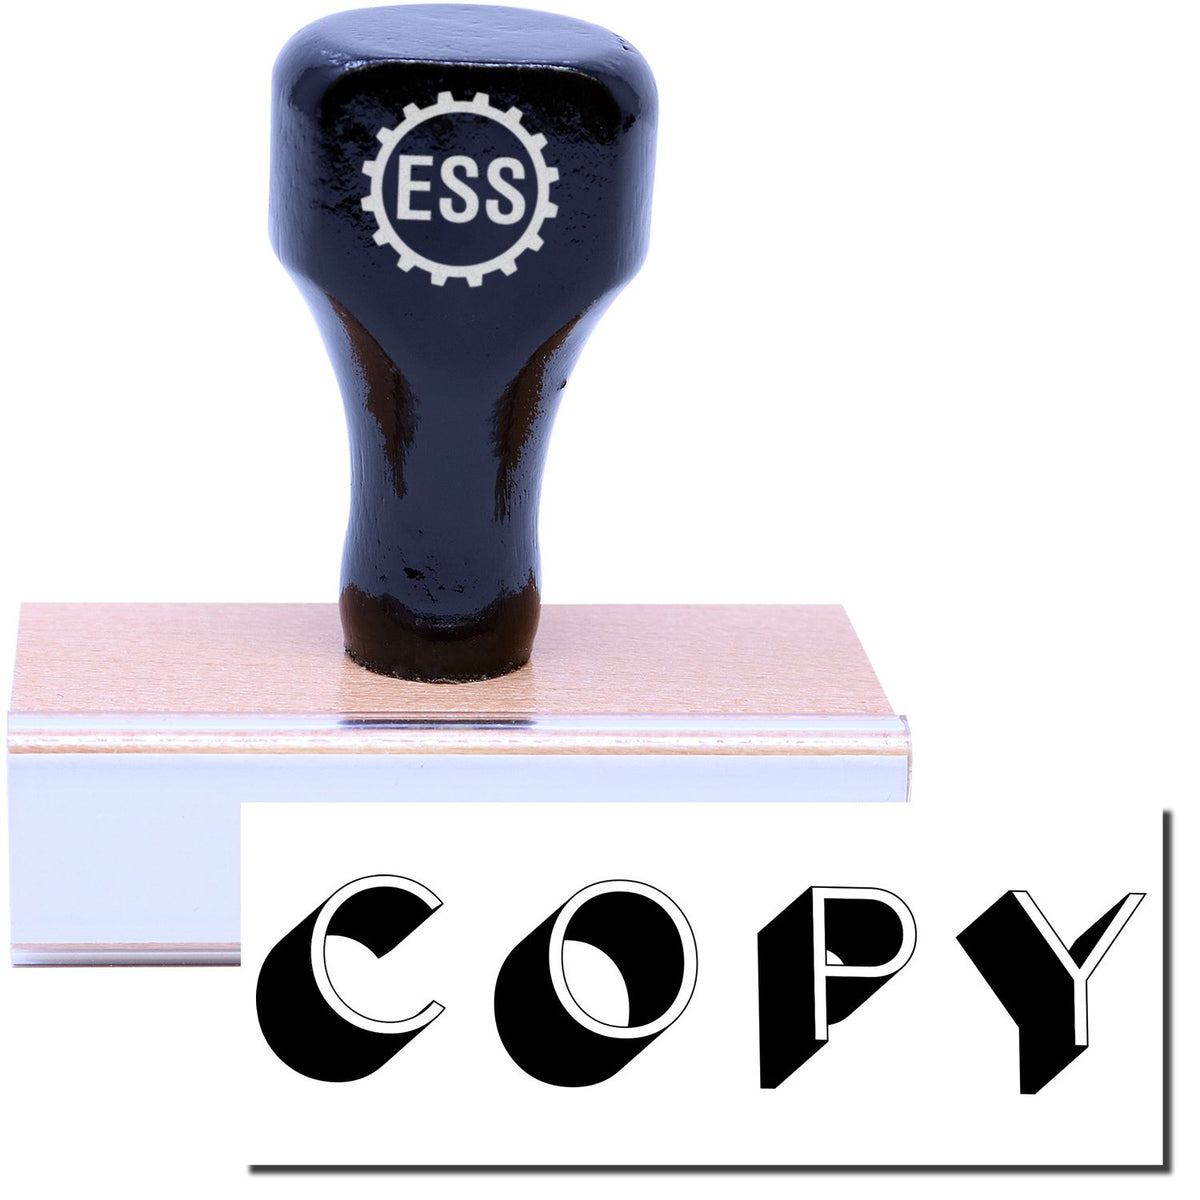 A stock office rubber stamp with a stamped image showing how the text &quot;COPY&quot; in a large font with a shadow behind the word is displayed after stamping.